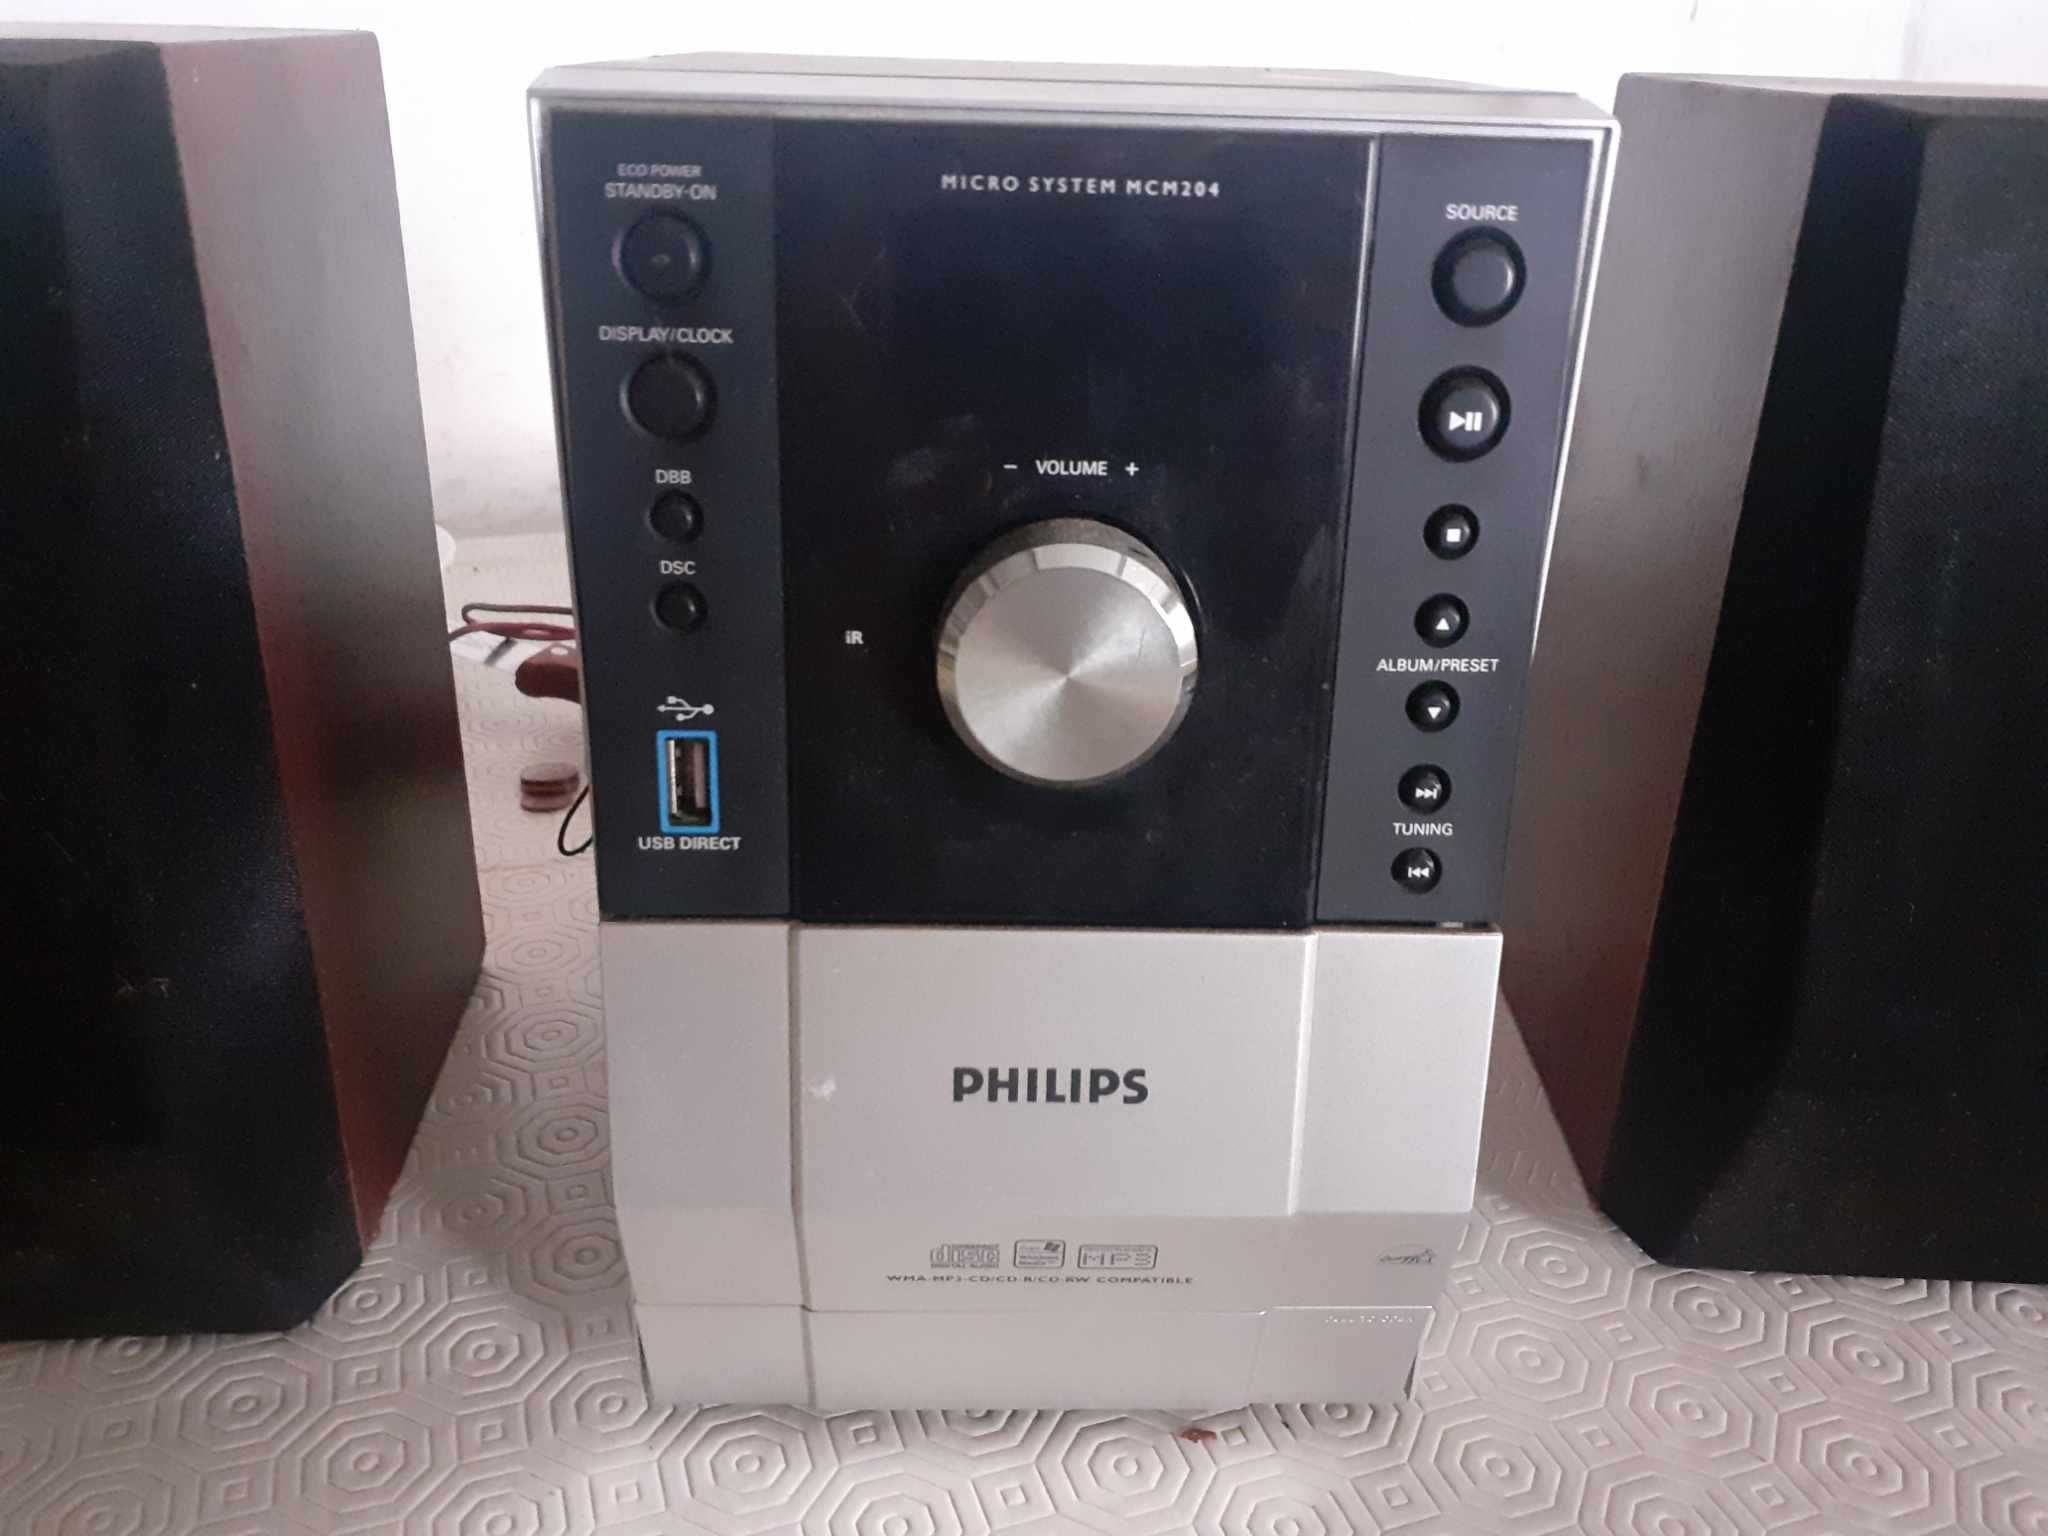 Philips micro system mcm204